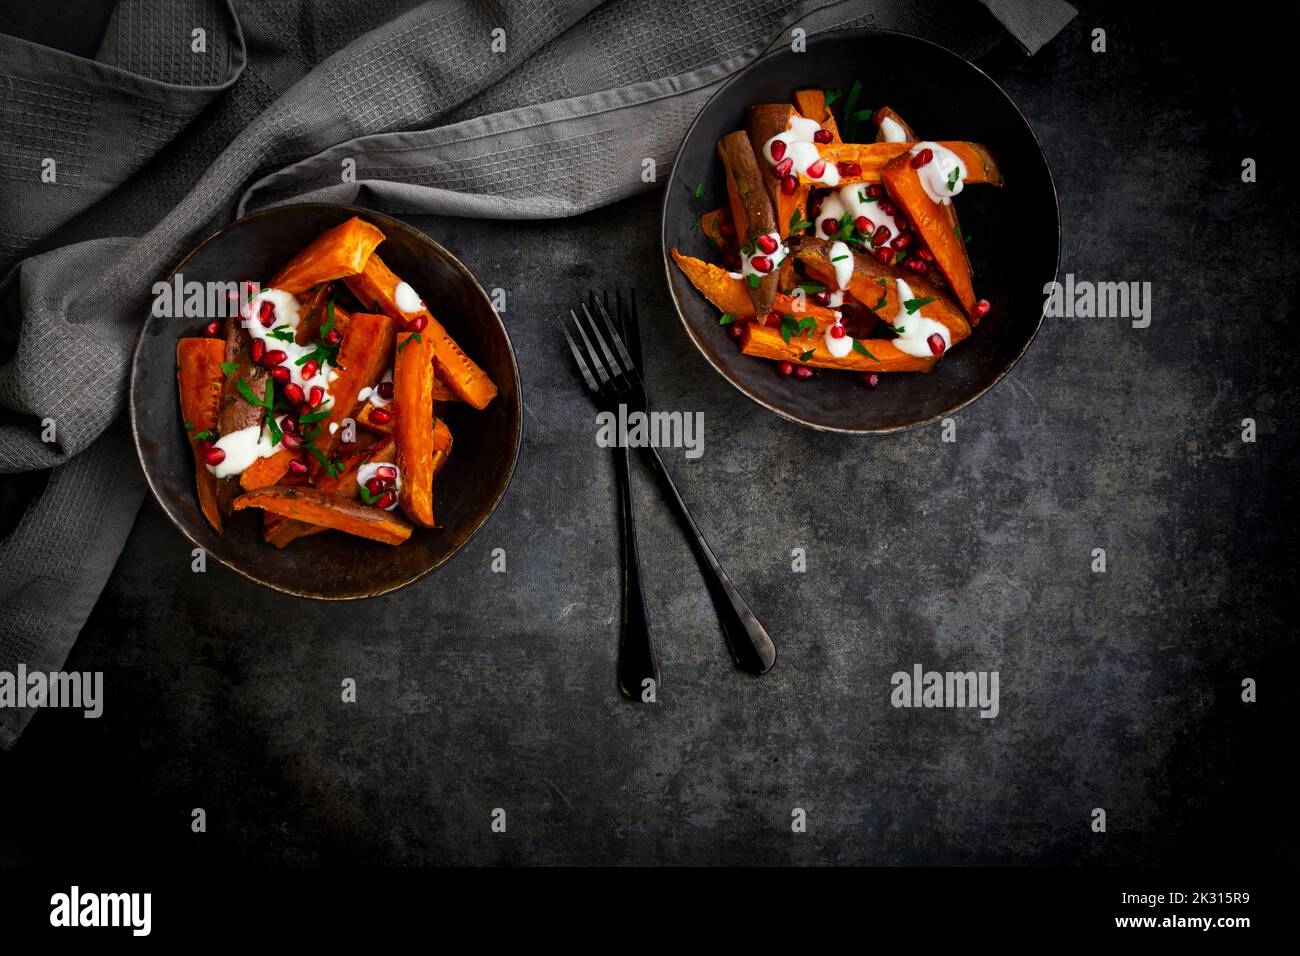 Studio shot of two bowls of sweet potatoes with parsley, pomegranate seeds and yogurt sauce Stock Photo